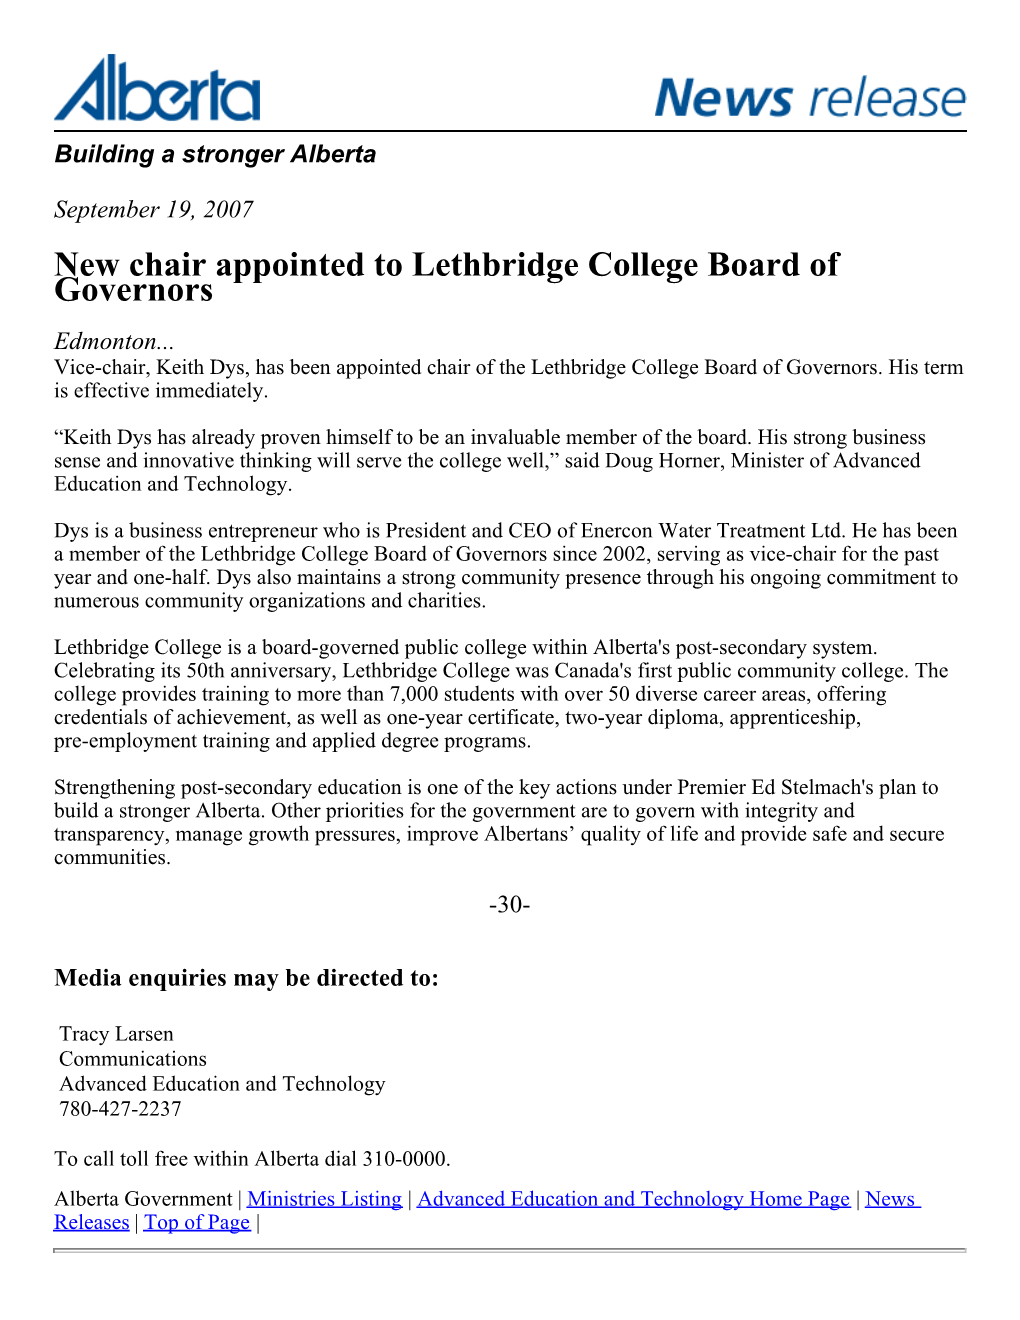 New Chair Appointed to Lethbridge College Board of Governors Edmonton